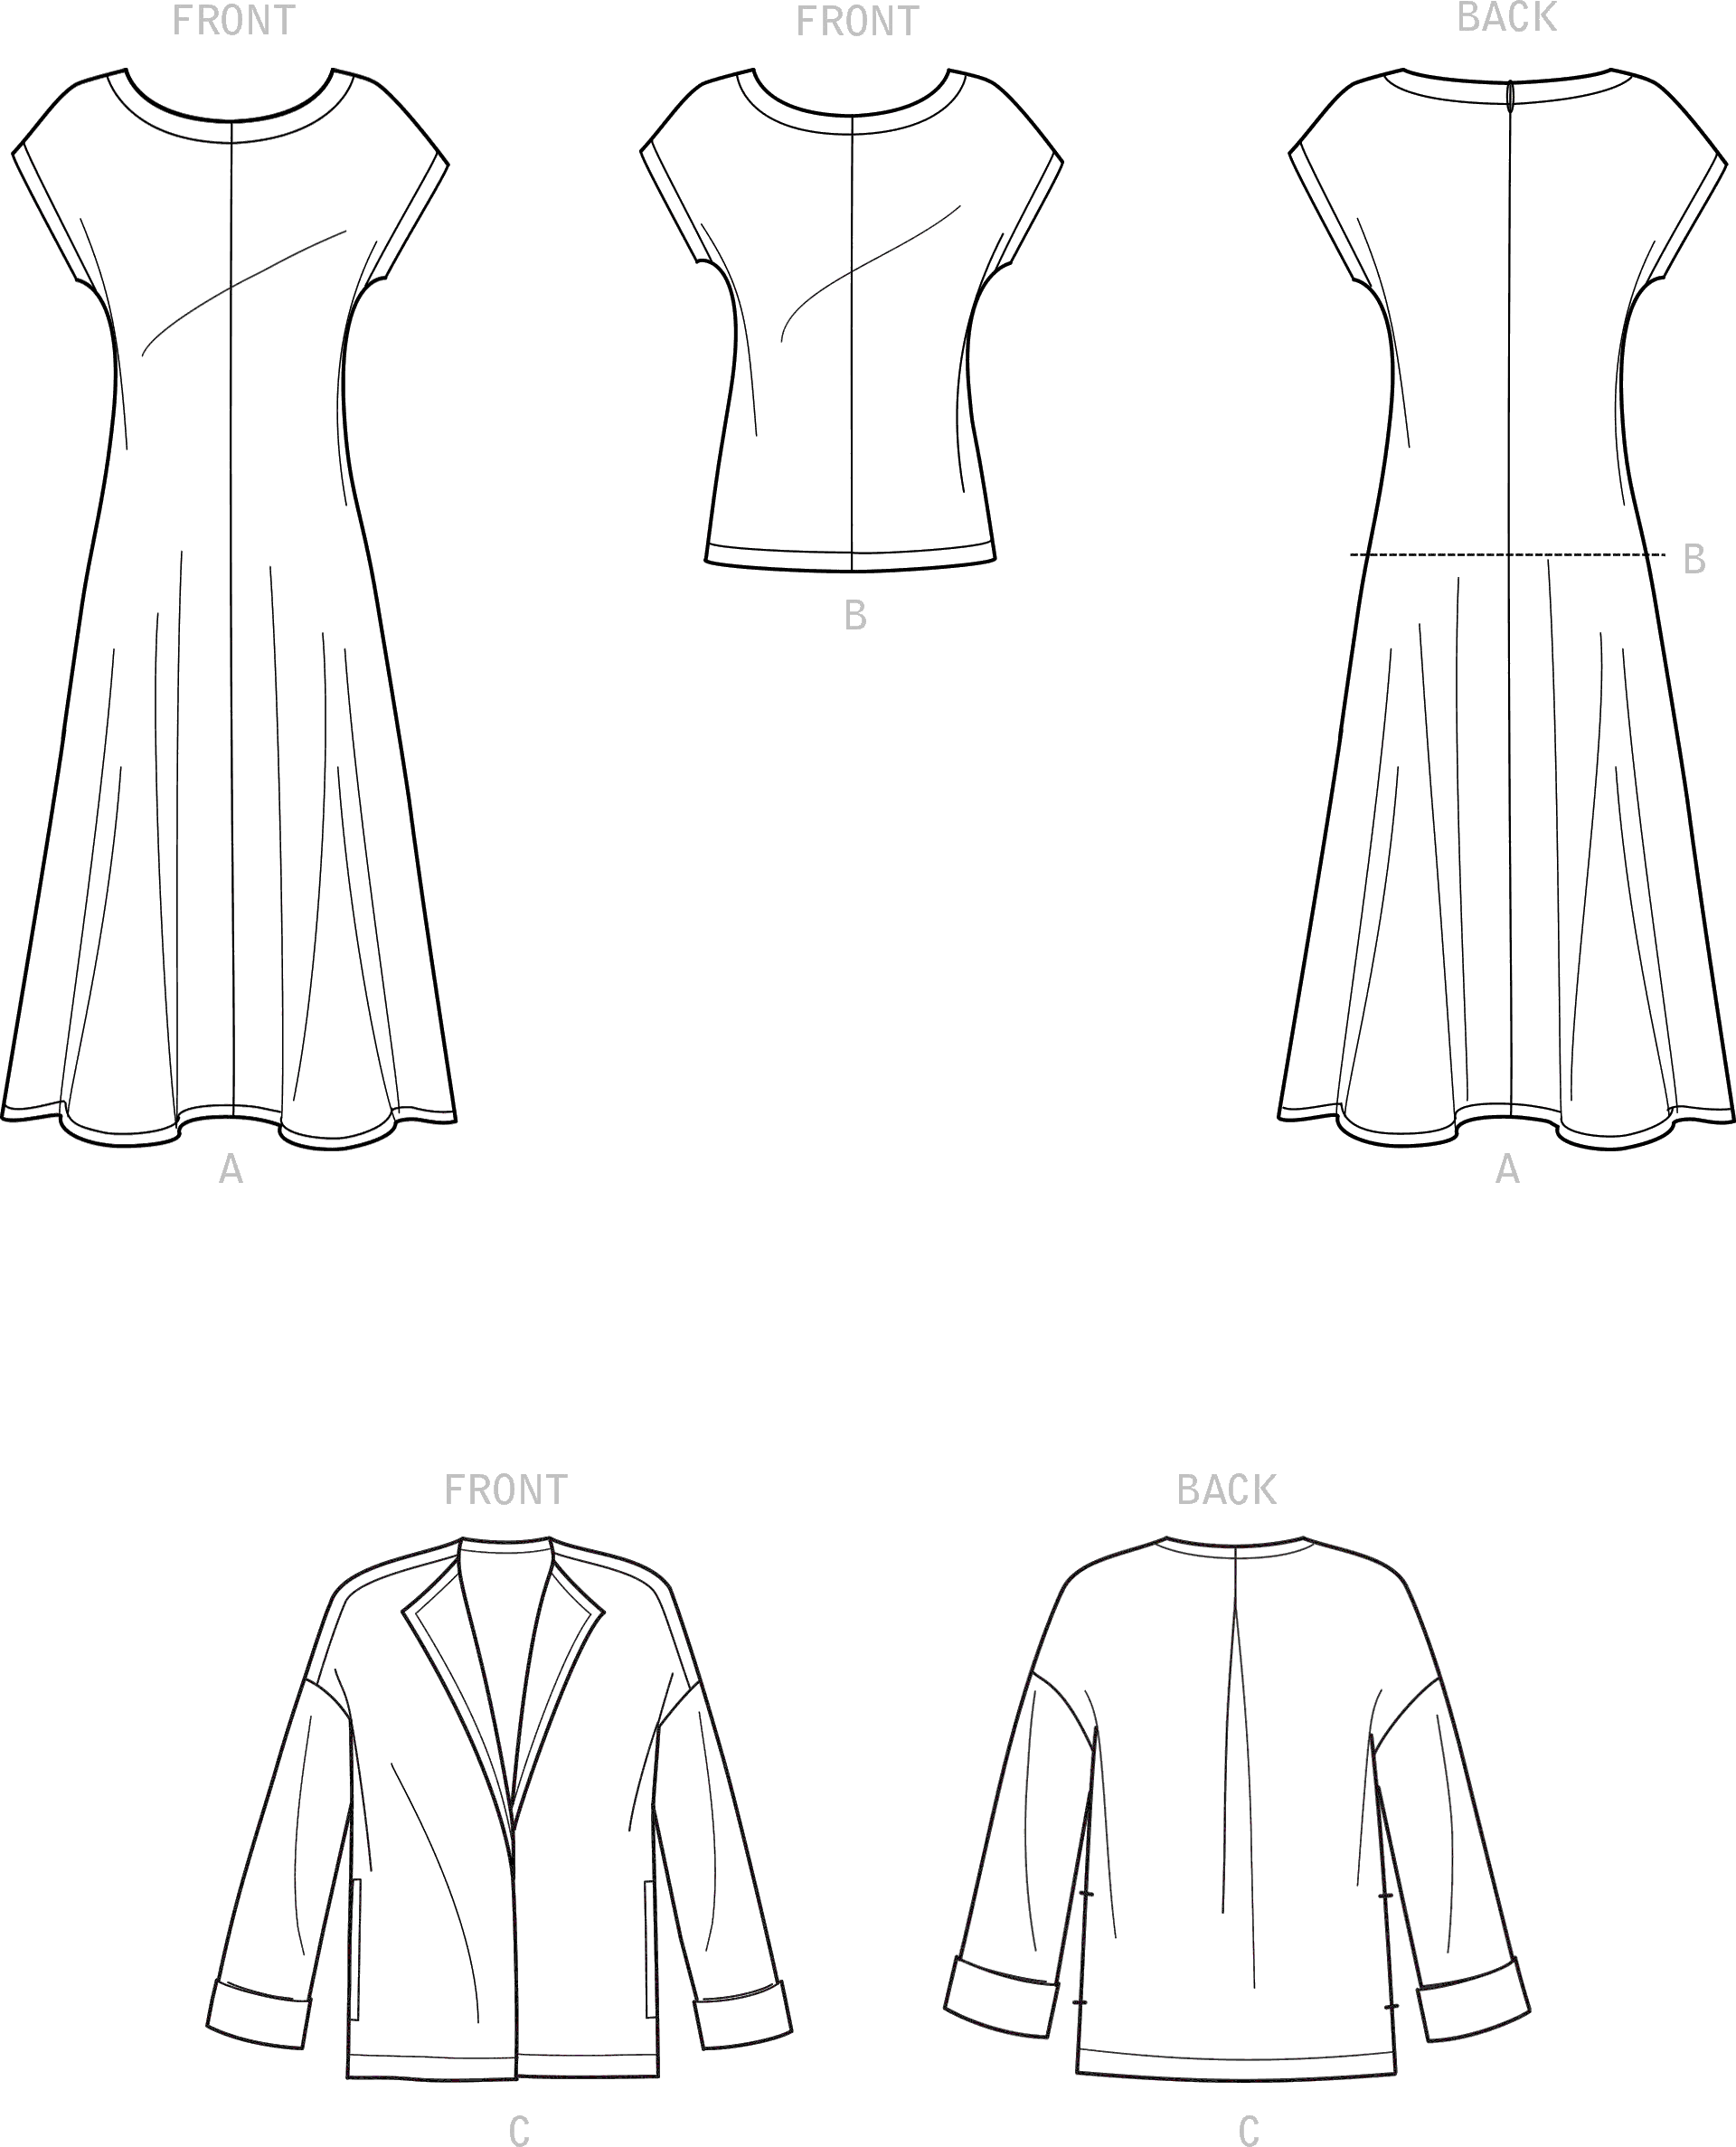 Simplicity Sewing Pattern S9263 Misses Dress Jacket and Top 9263 Line Art From Patternsandplains.com